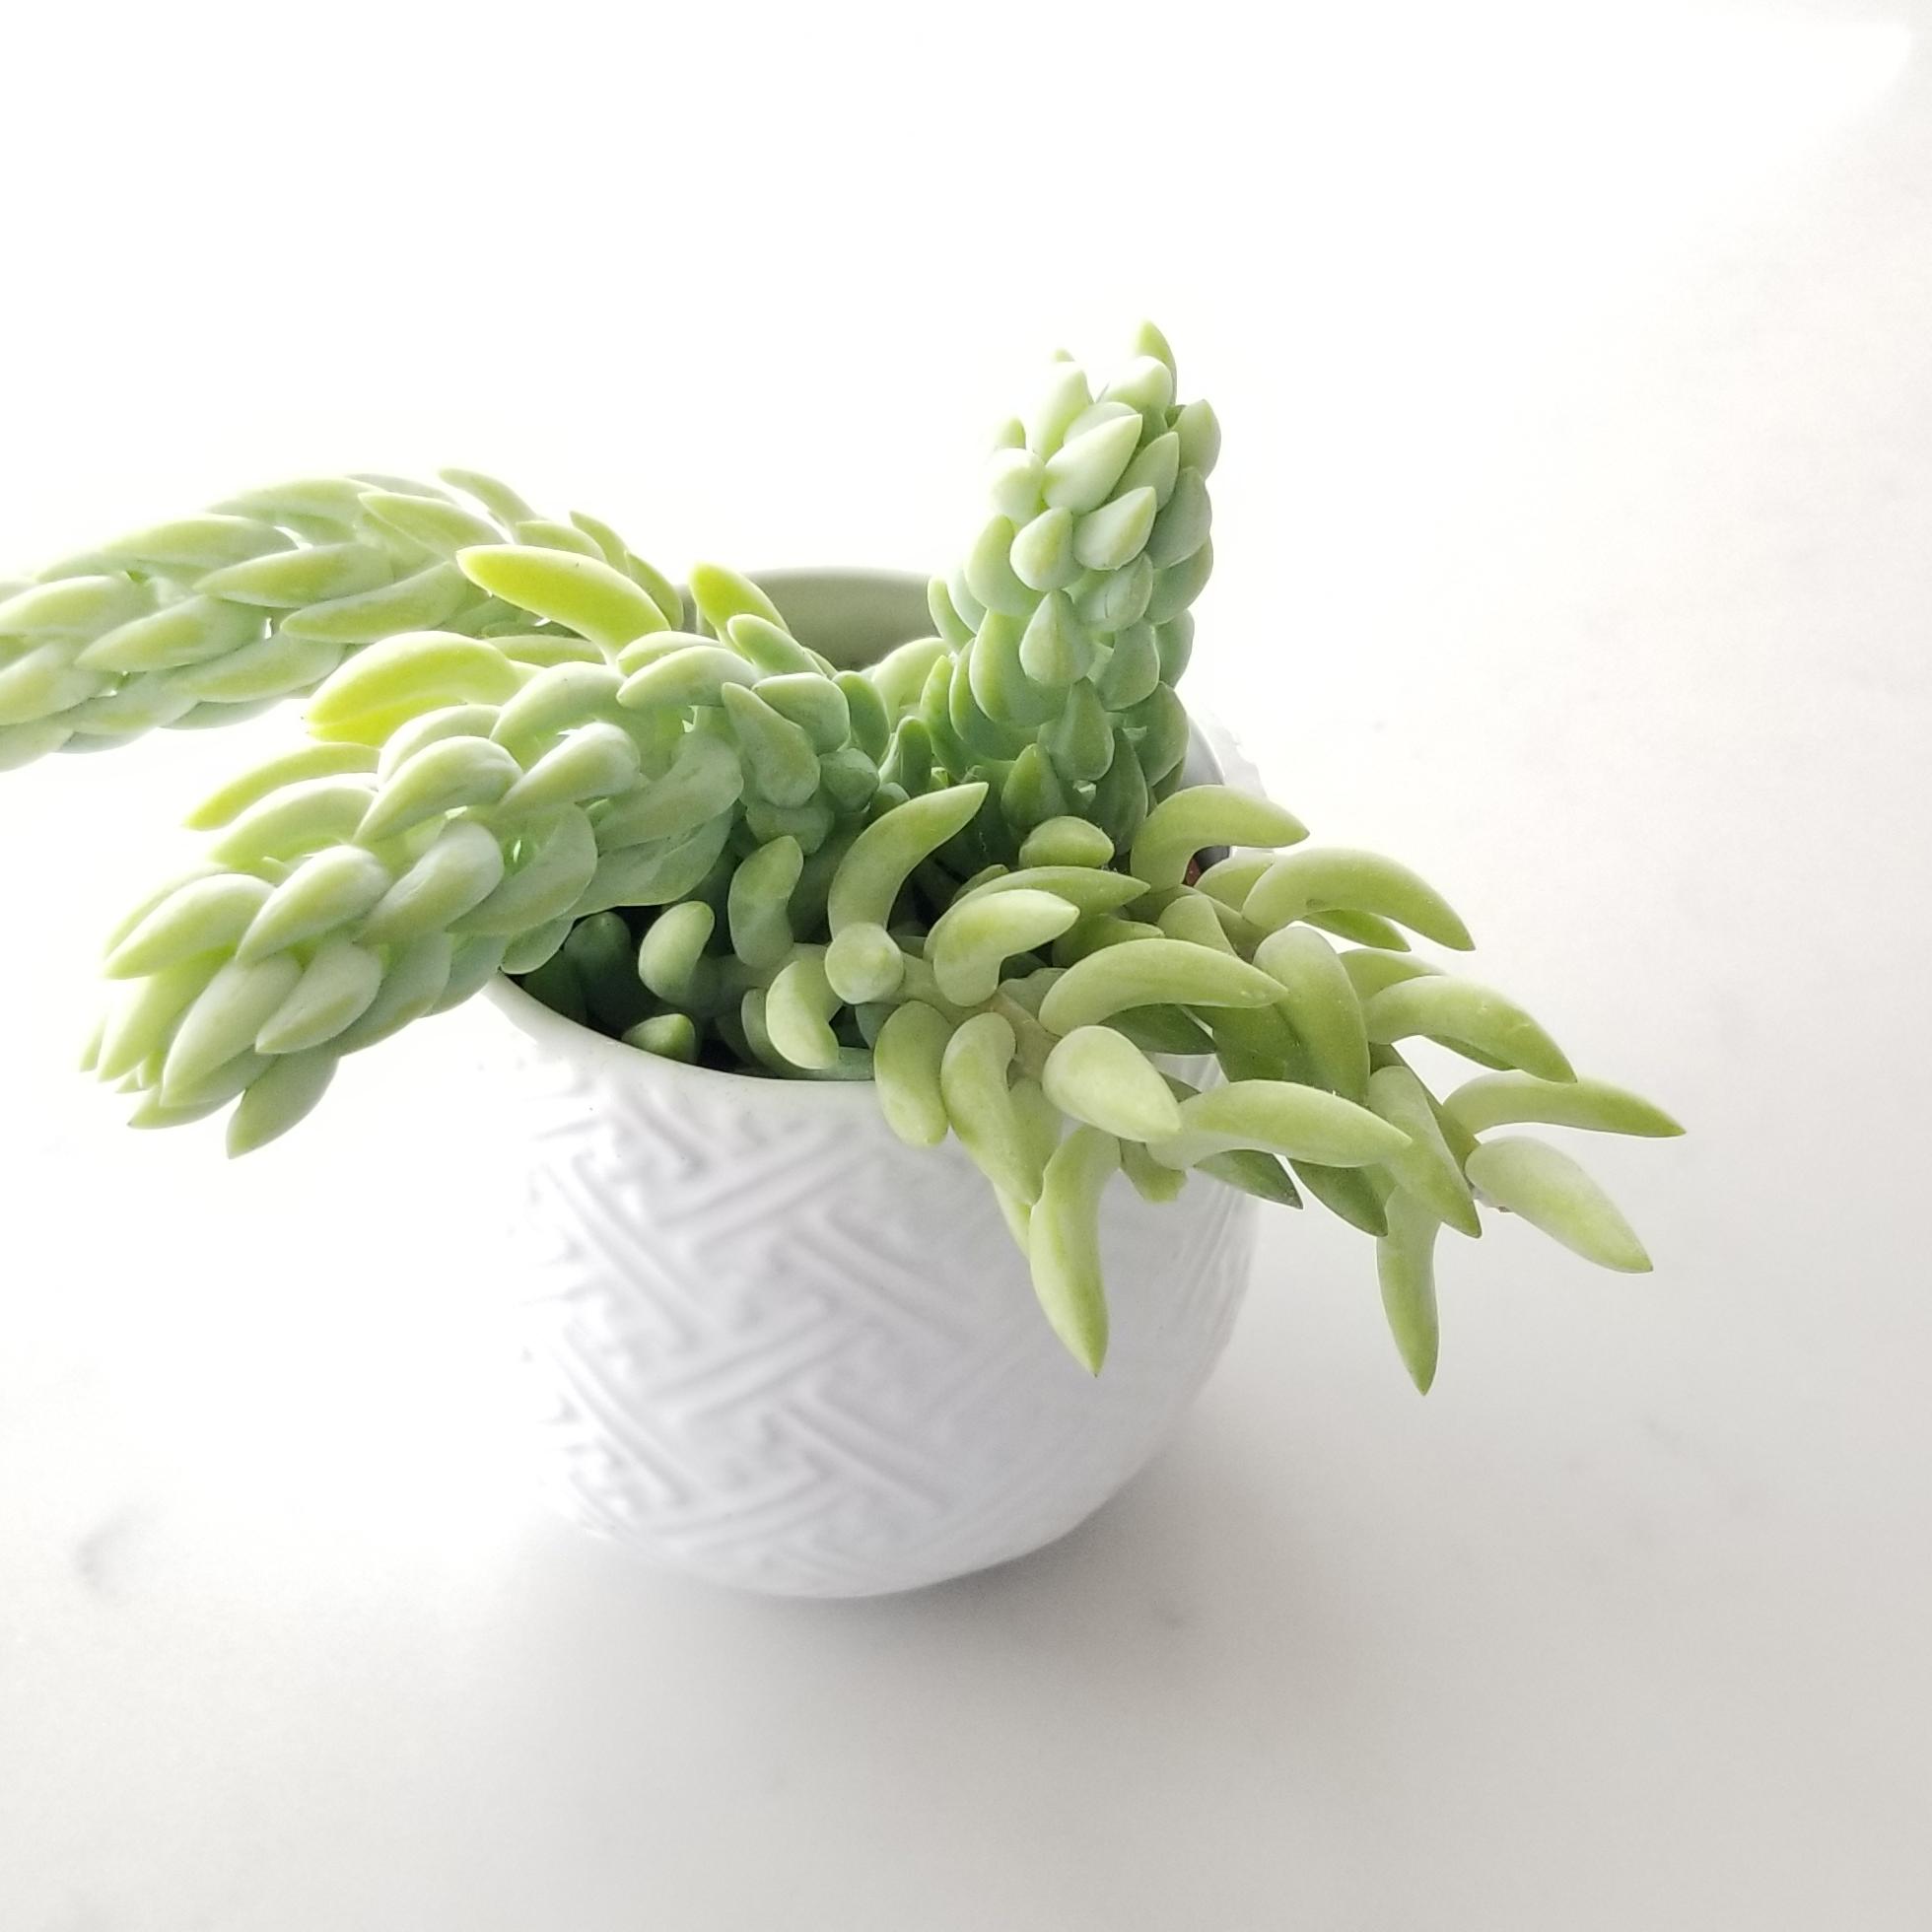 Burros tail in deco ceramic container Plant Gifts Christmas Toronto Mississauga Brampton